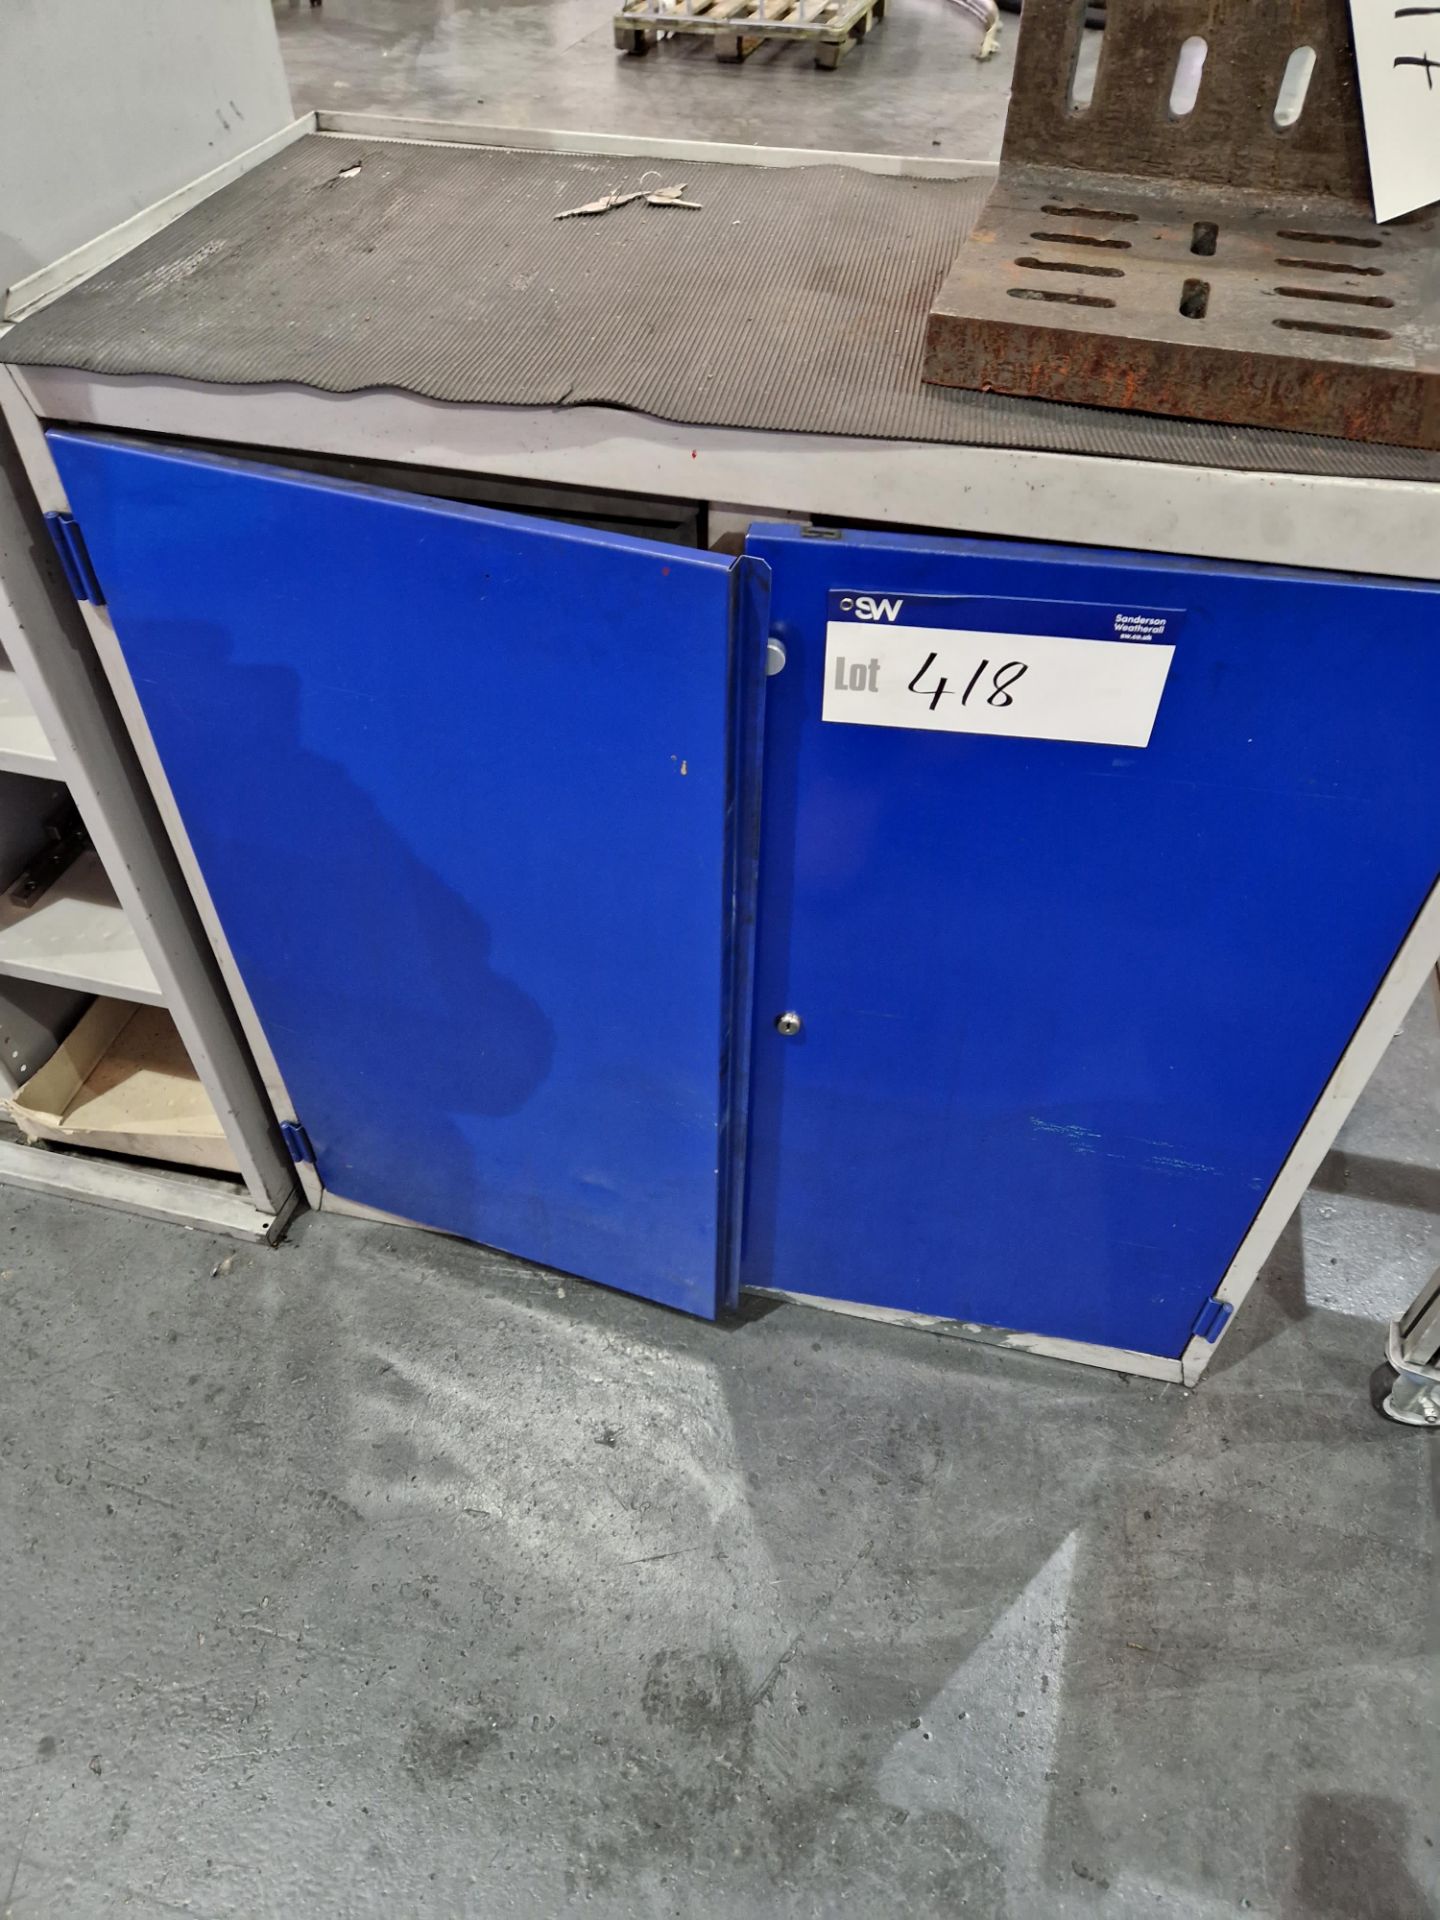 Double Door Cabinet & Contents , including Milling Machine Attachments, Bits & CuttersPlease read